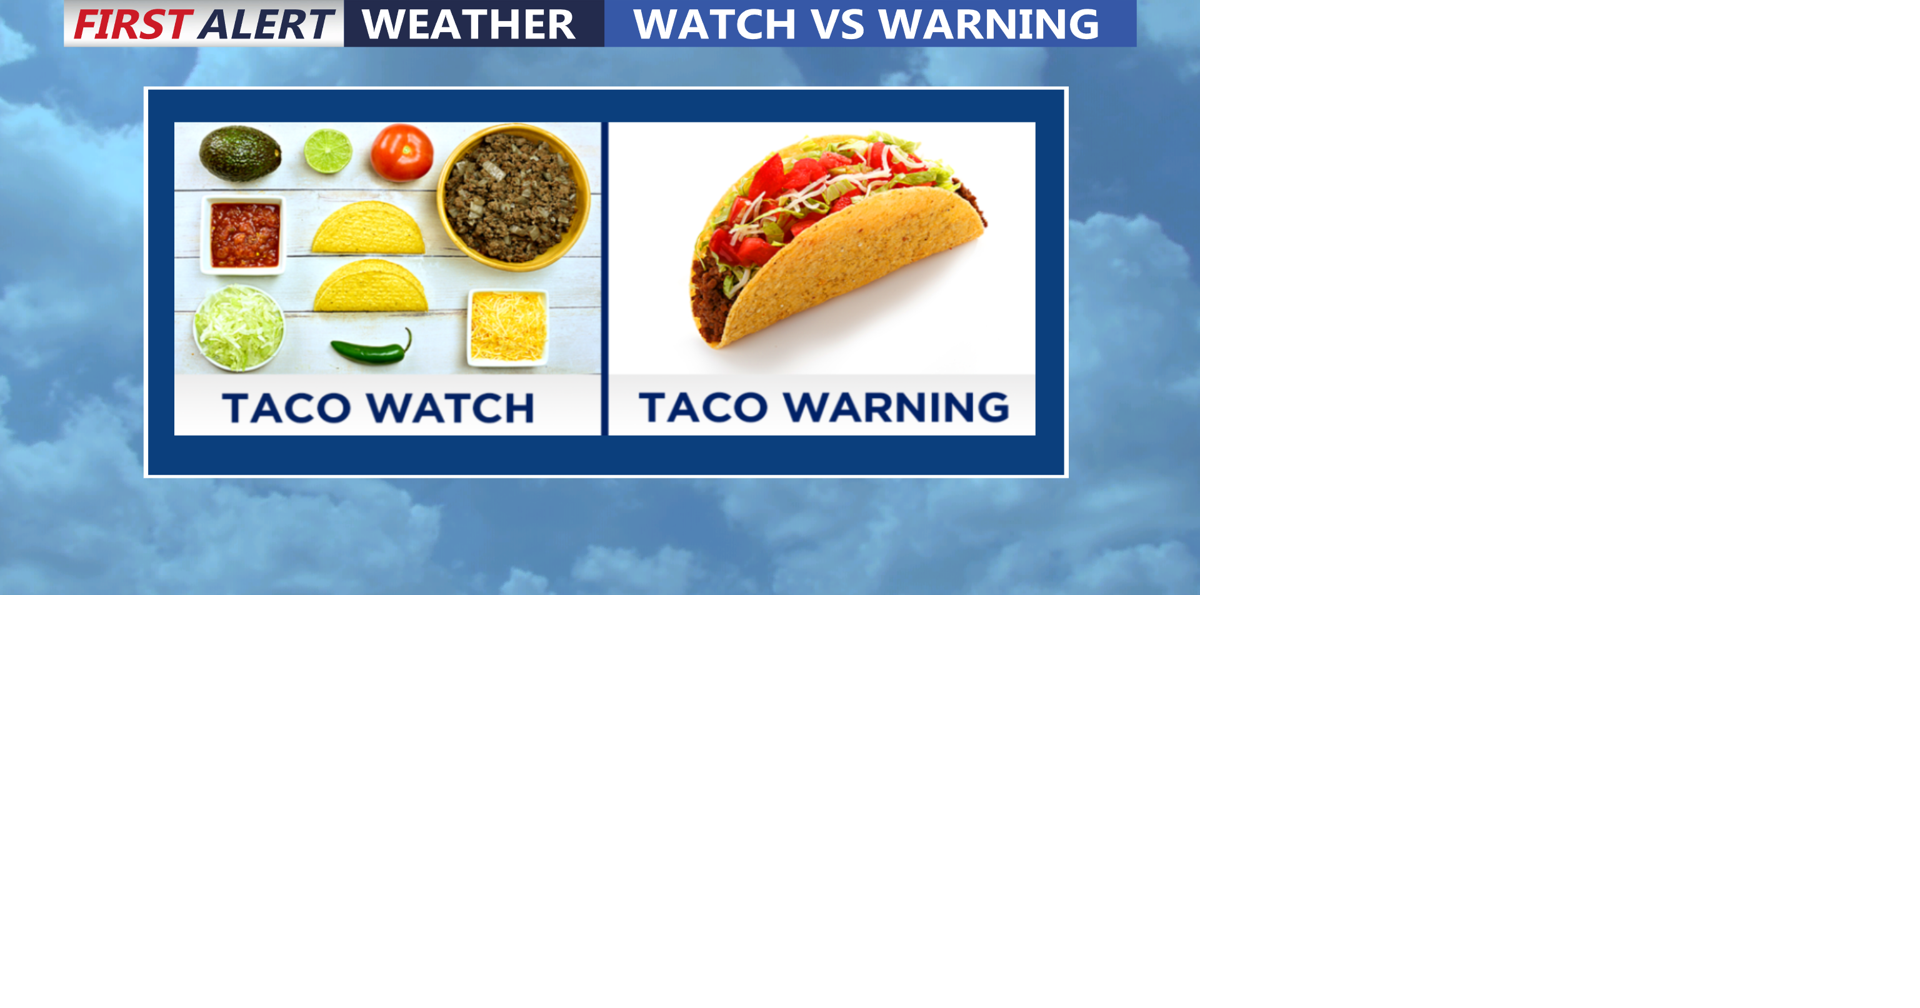 Let's TacoBout Tornado Watches vs Warnings News